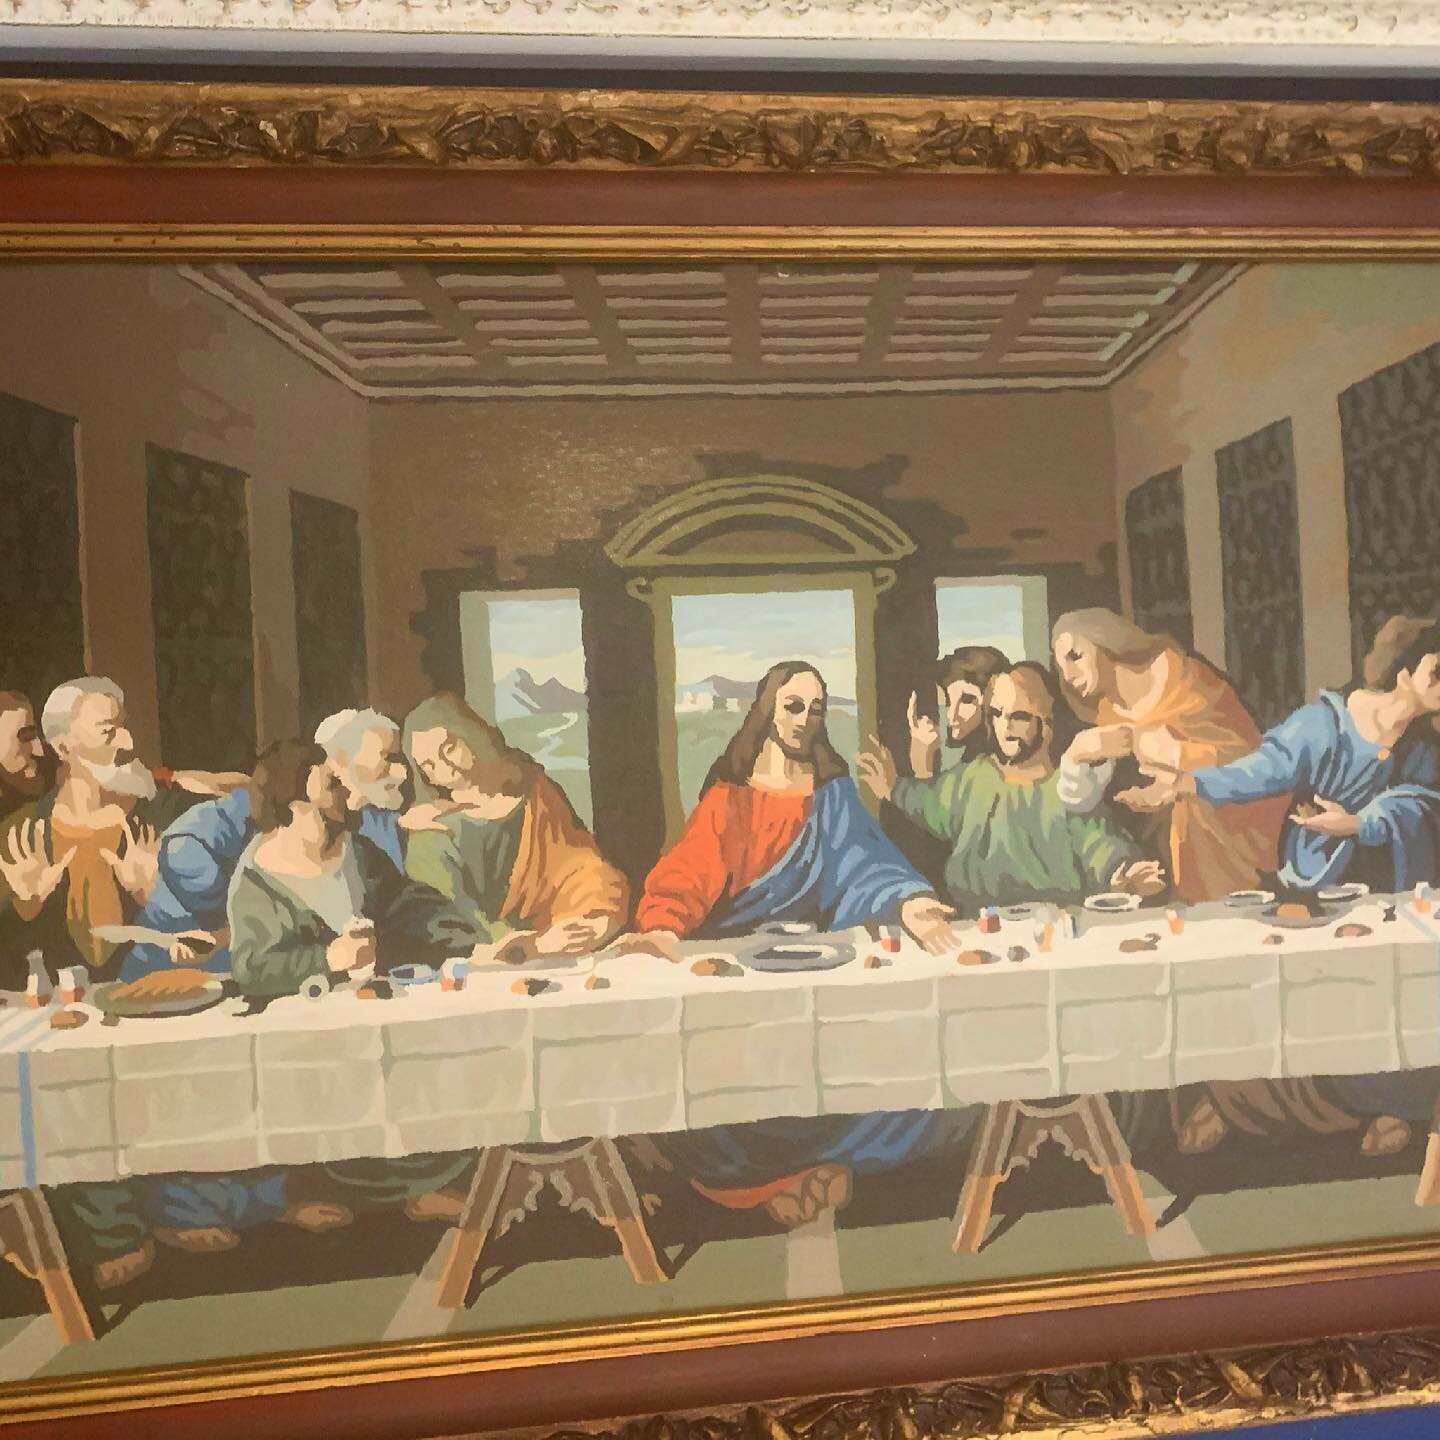 Scot surprised me with a Last Supper Vintage Paint by Number. Need to rearrange my gallery wall now. #vintagepaintbynumber #paintbynumbers #gallerywall